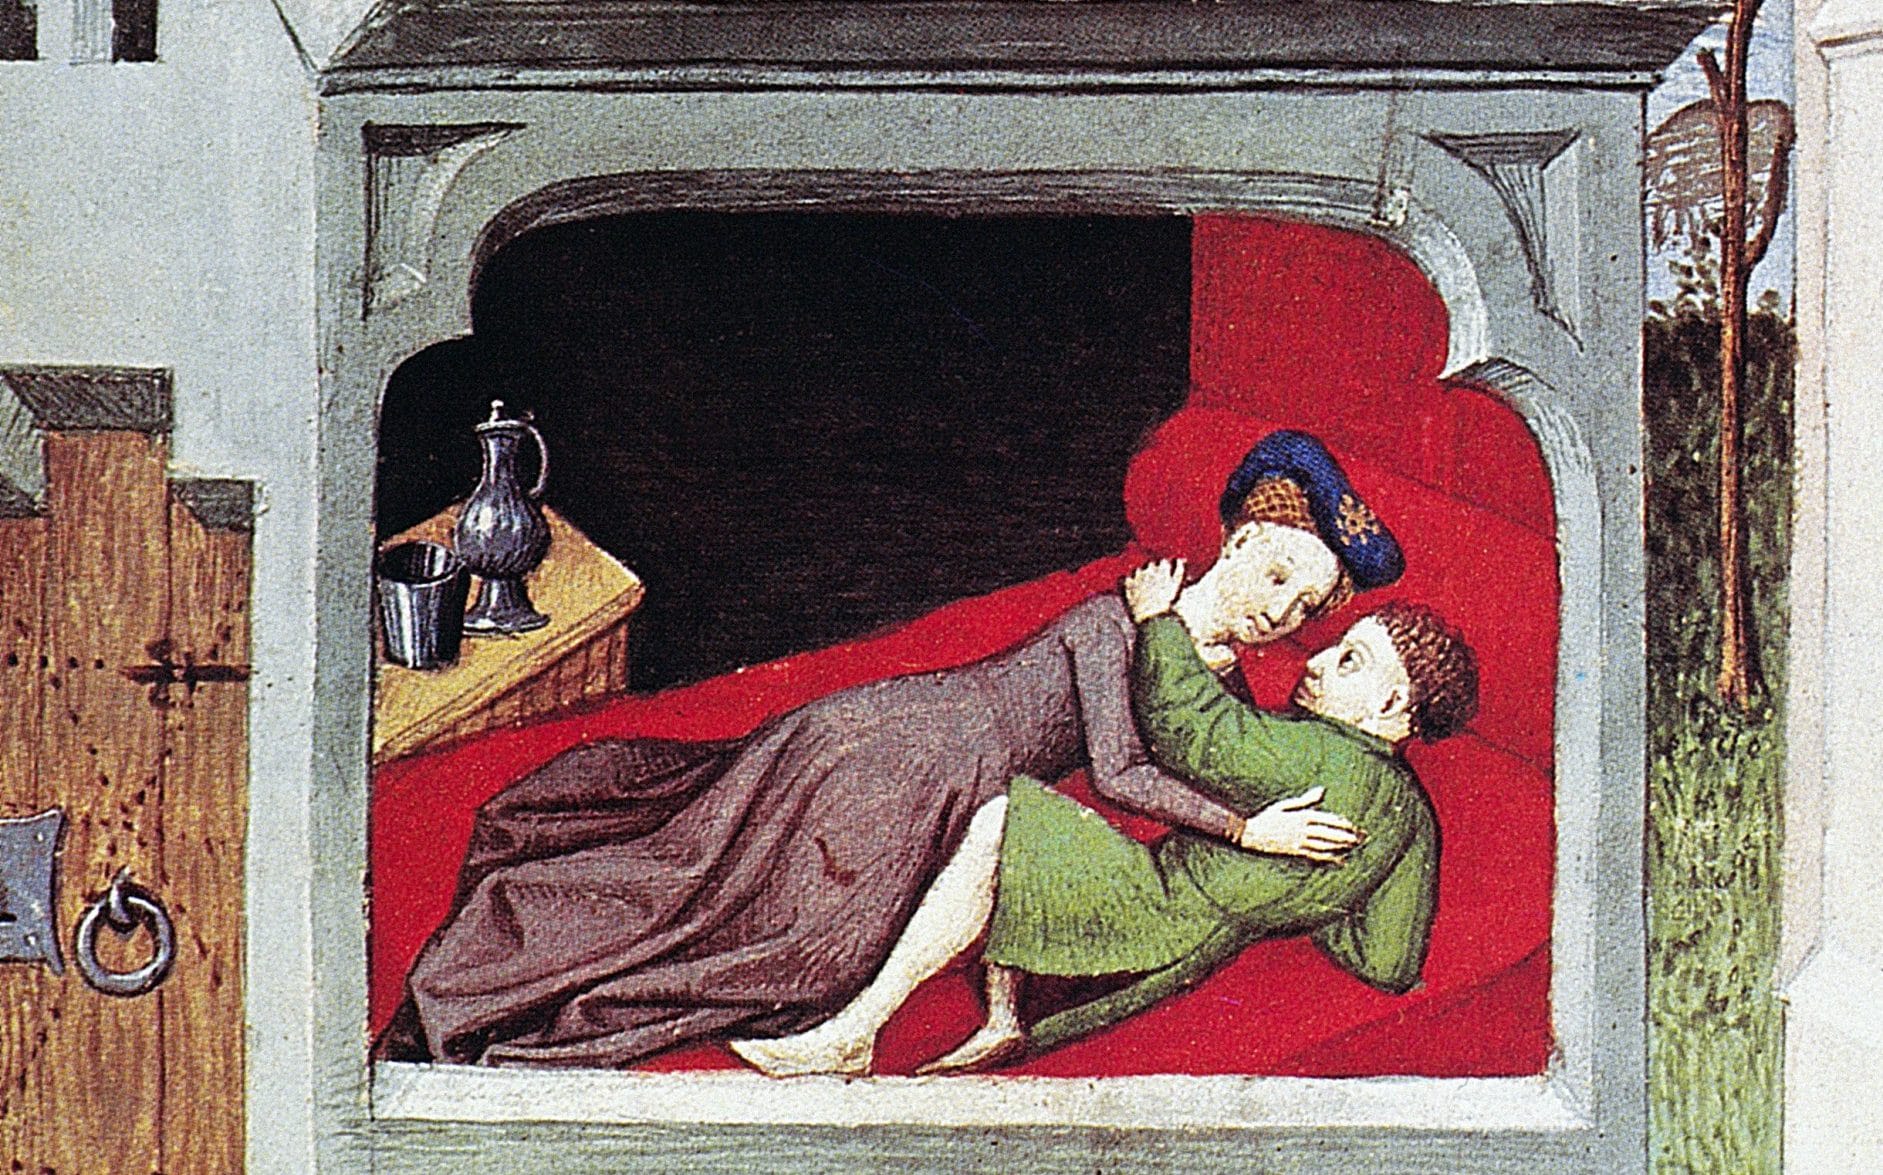 How to have sex like a saint – according to the 14th century’s naughtiest author